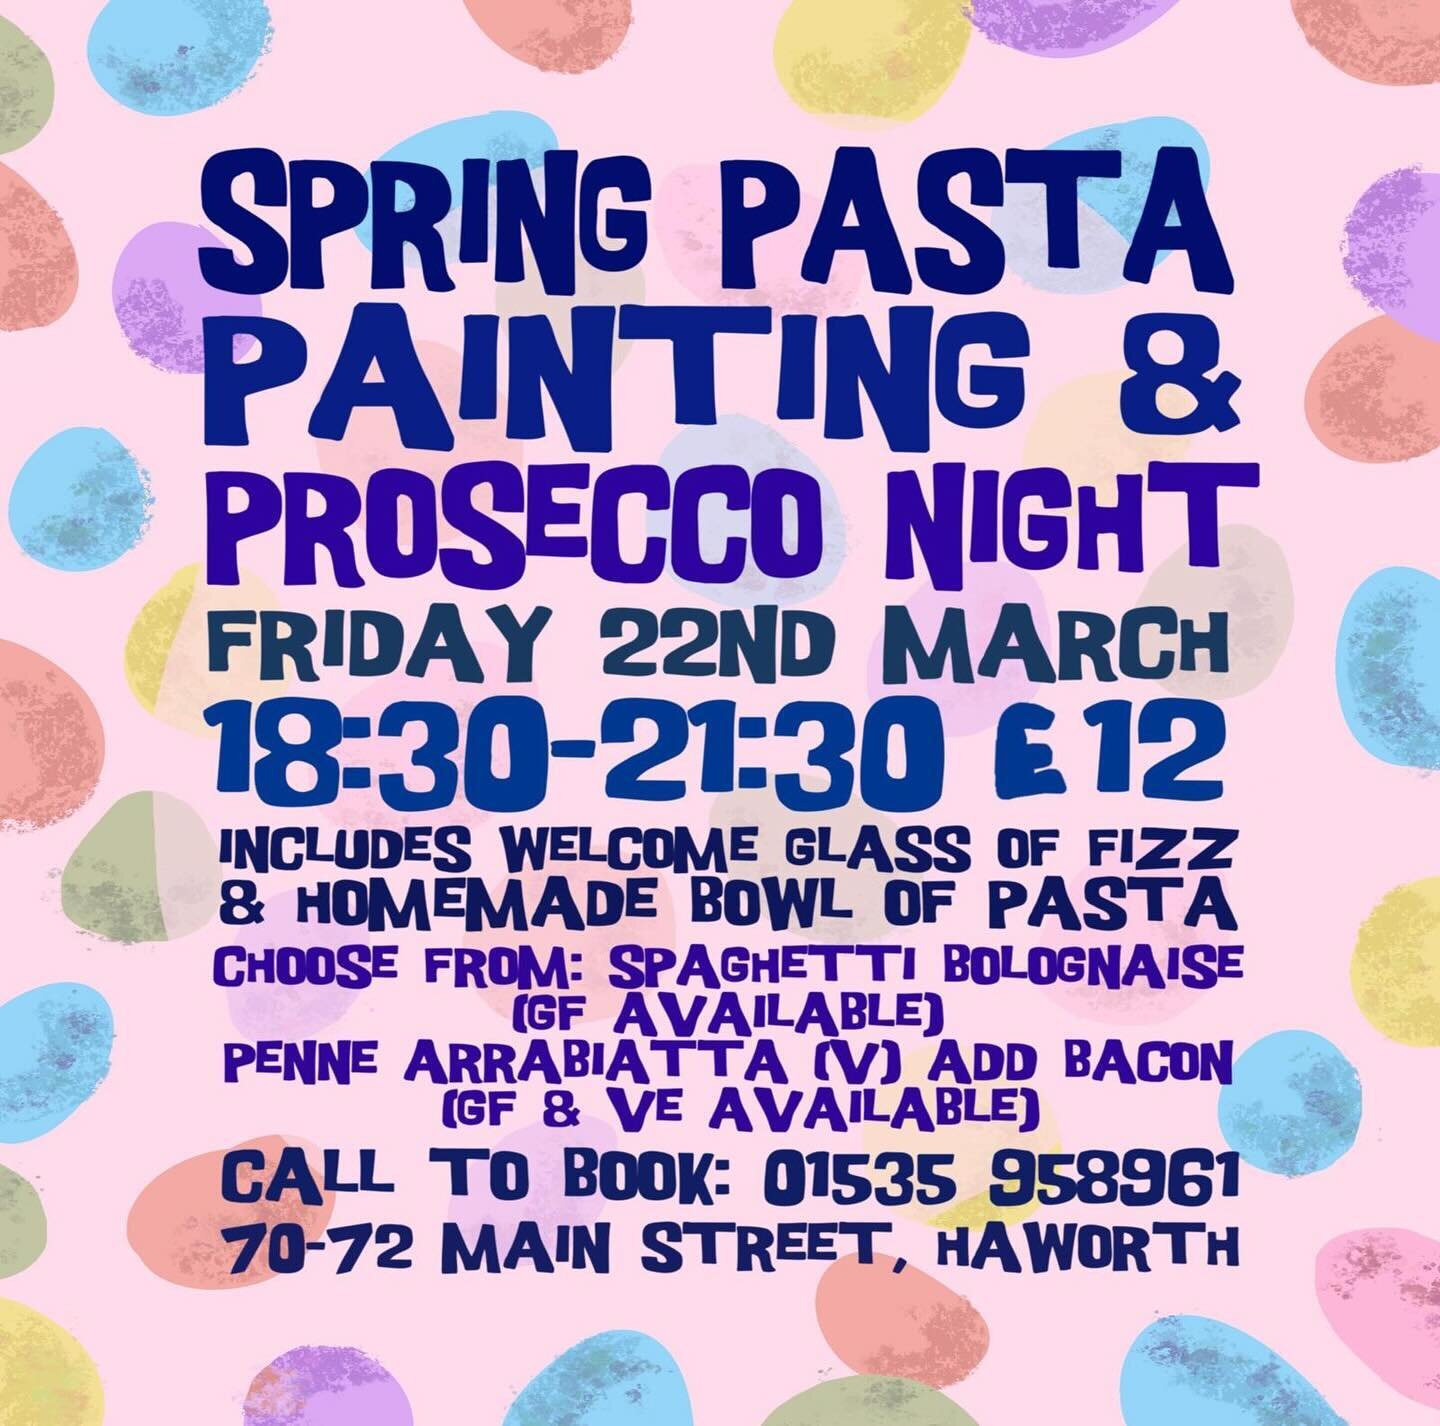 We will be holding a sip &amp; paint evening on Friday 22nd March. A great way to get together with friends &amp; family or a date night. 🥂🎨🍝

Tickets are &pound;12 per person and include a glass of fizz upon arrival and a bowl of pasta. To book a